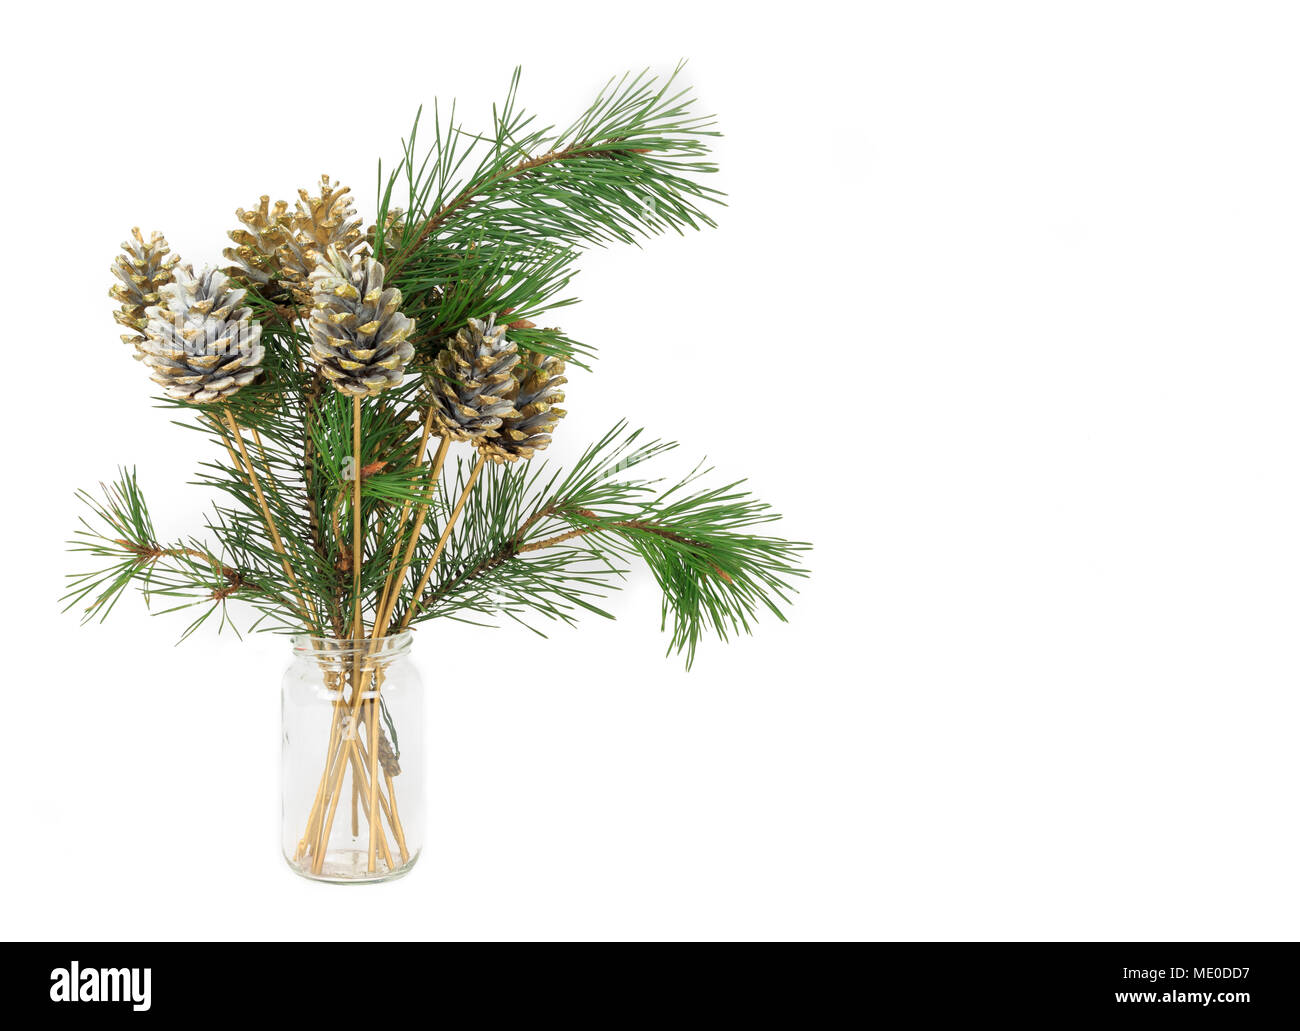 Christmas decoration of gold painted pine cones and branches in glass jar isolated on white background Stock Photo